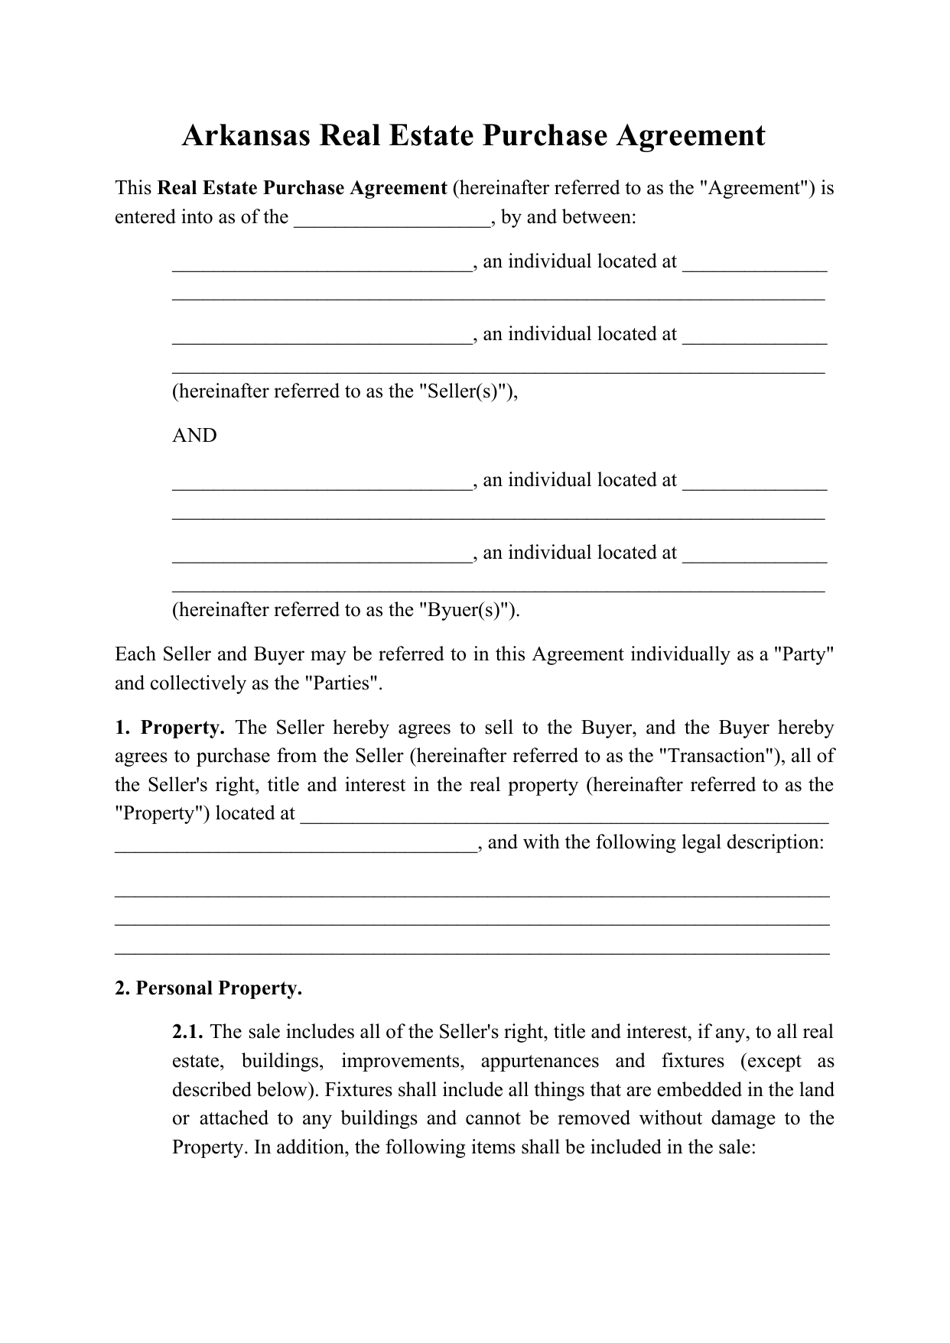 Real Estate Purchase Agreement Template - Arkansas, Page 1